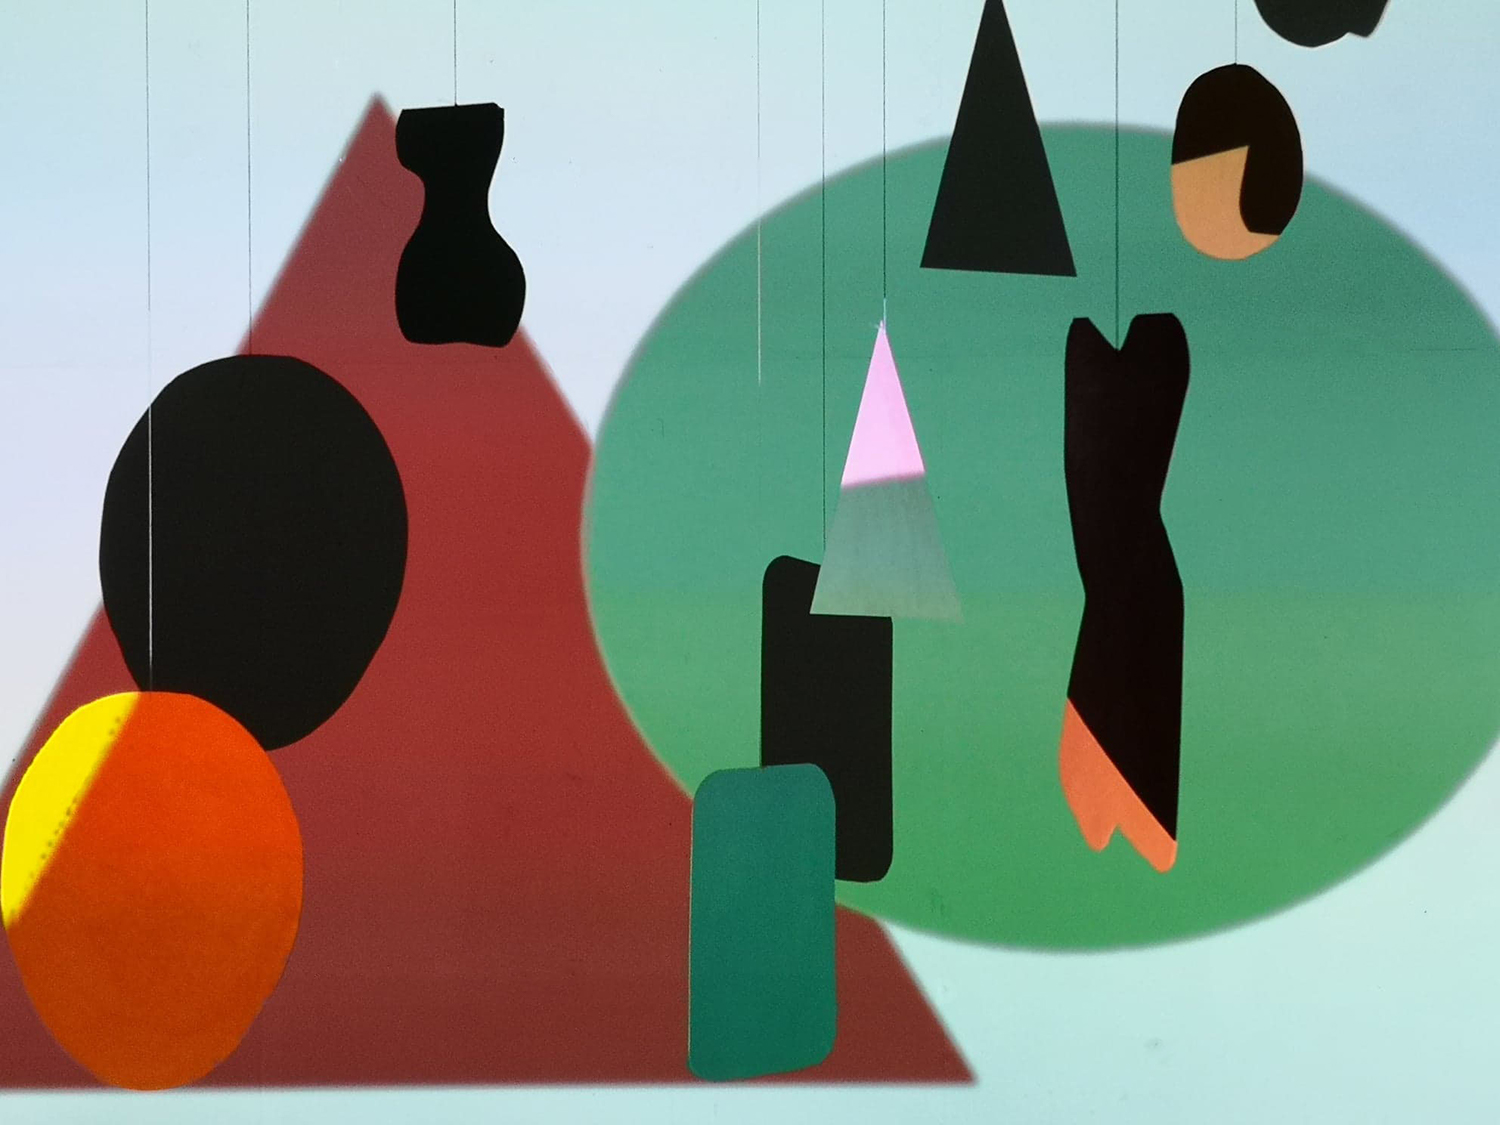 Colourful collage of abstract shapes in green, brown and orange